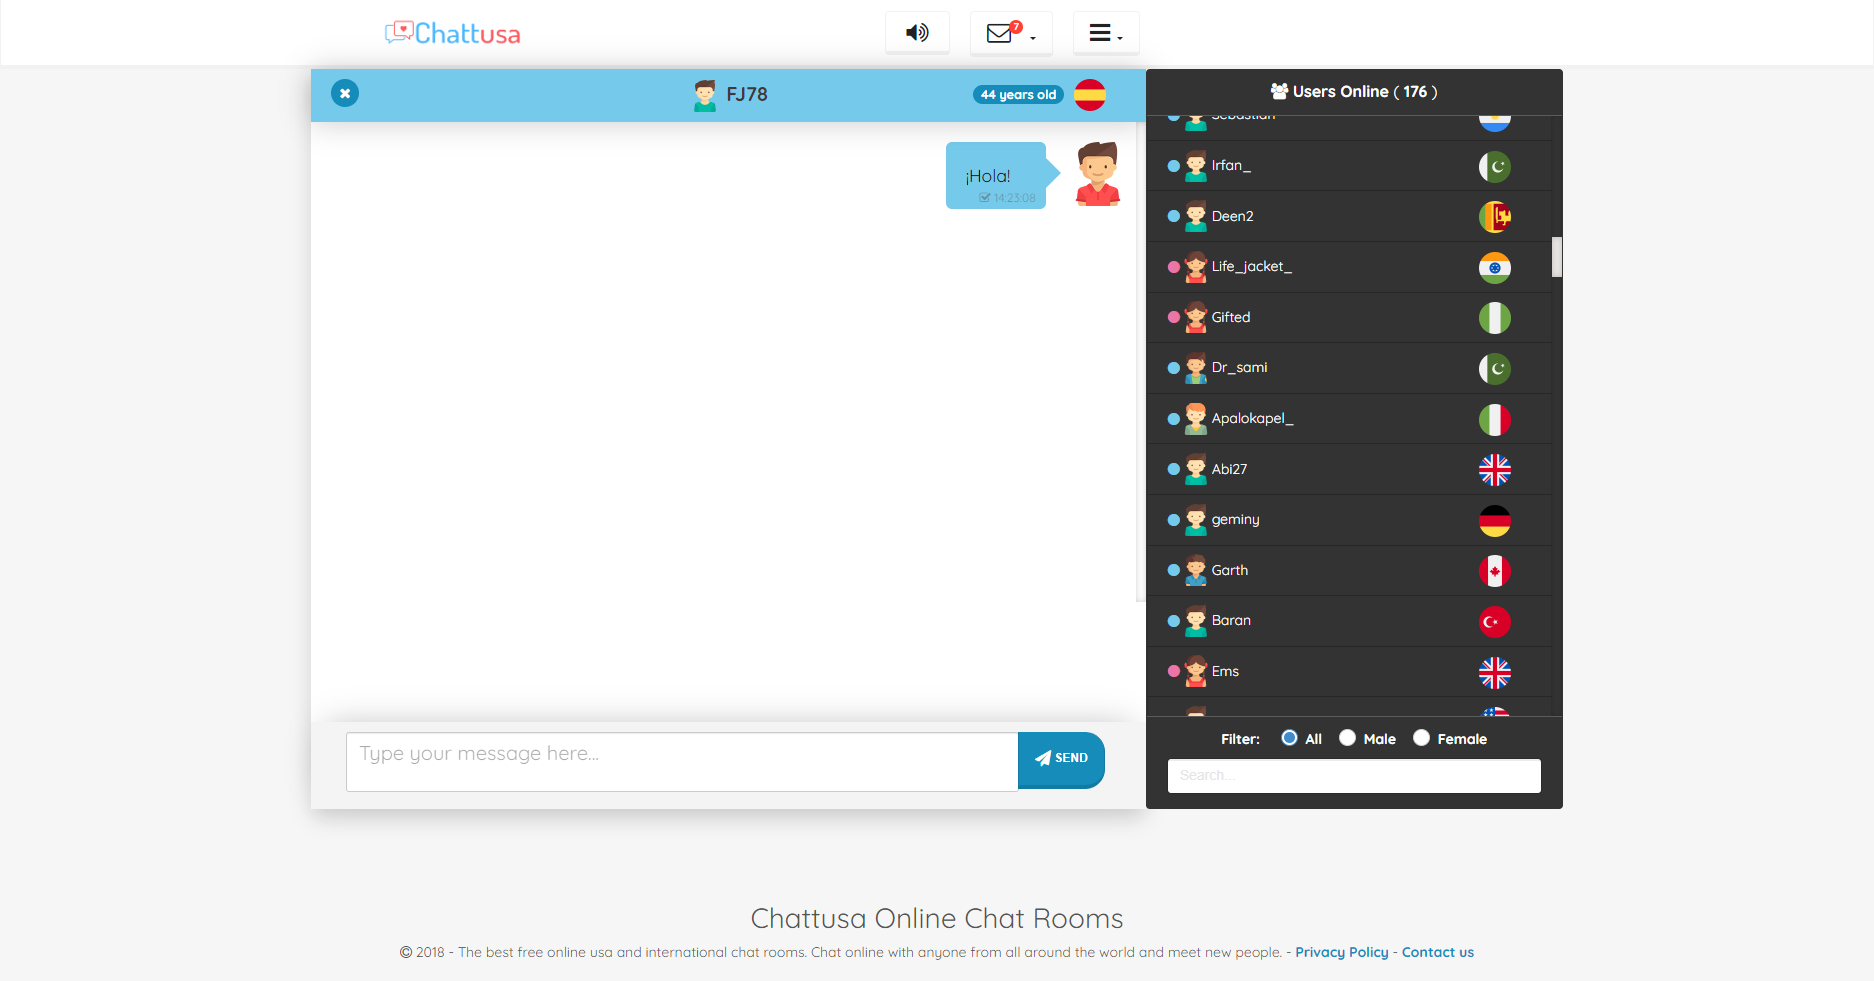 Preview image of Chattusa